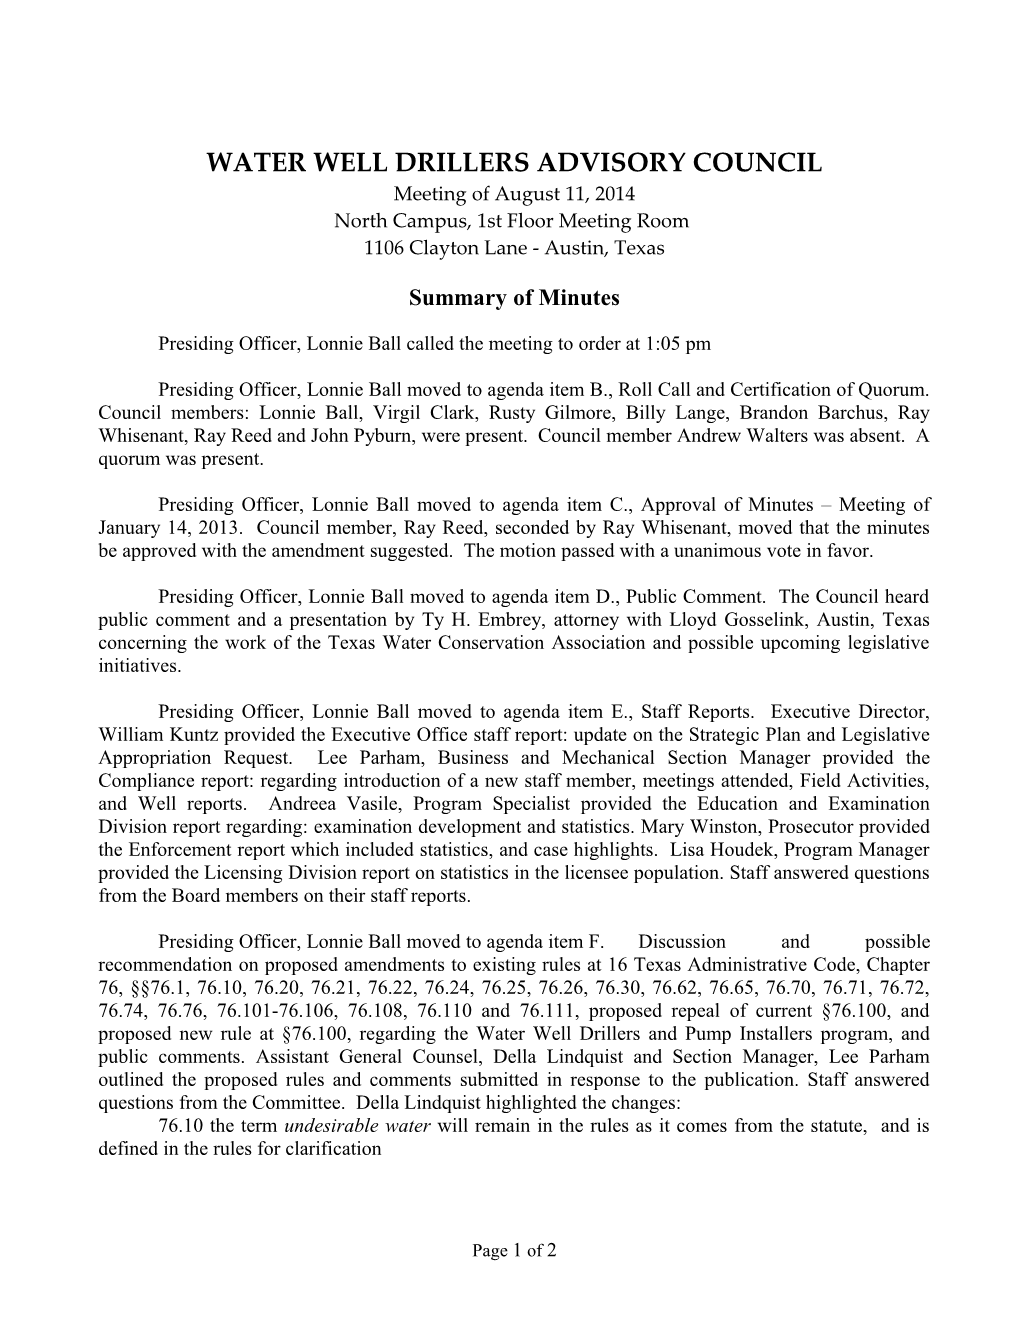 Water Well Drillers Advisory Council s1